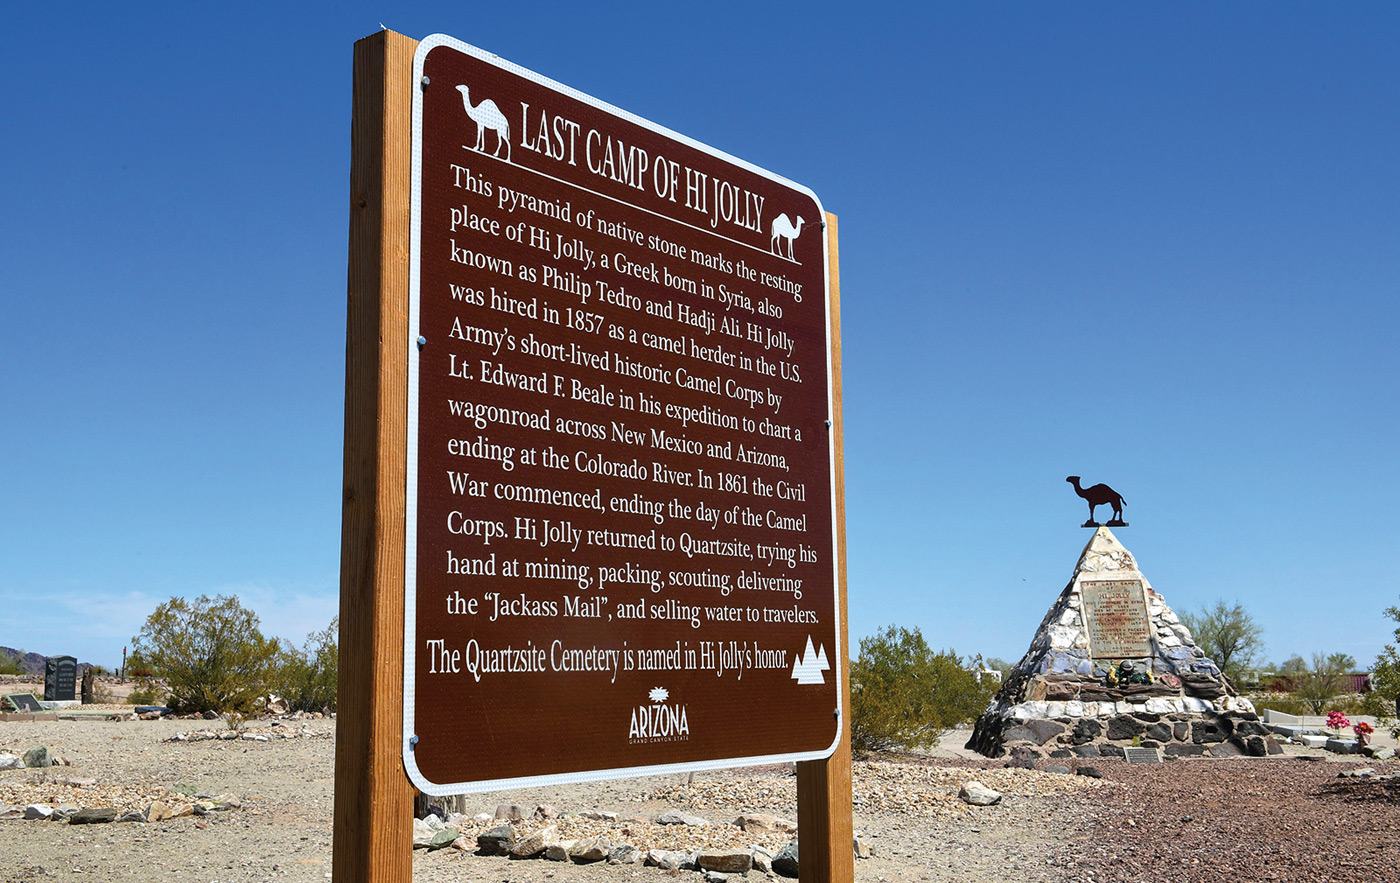 A historical marker and a pyramid-shaped memorial in Quartzsite, Arizona, keep alive the memory of Hi Jolly, who is described on the monument’s epitaph as “Cameldriver–Packer–Scout–Over thirty years a faithful aid to the US Government.